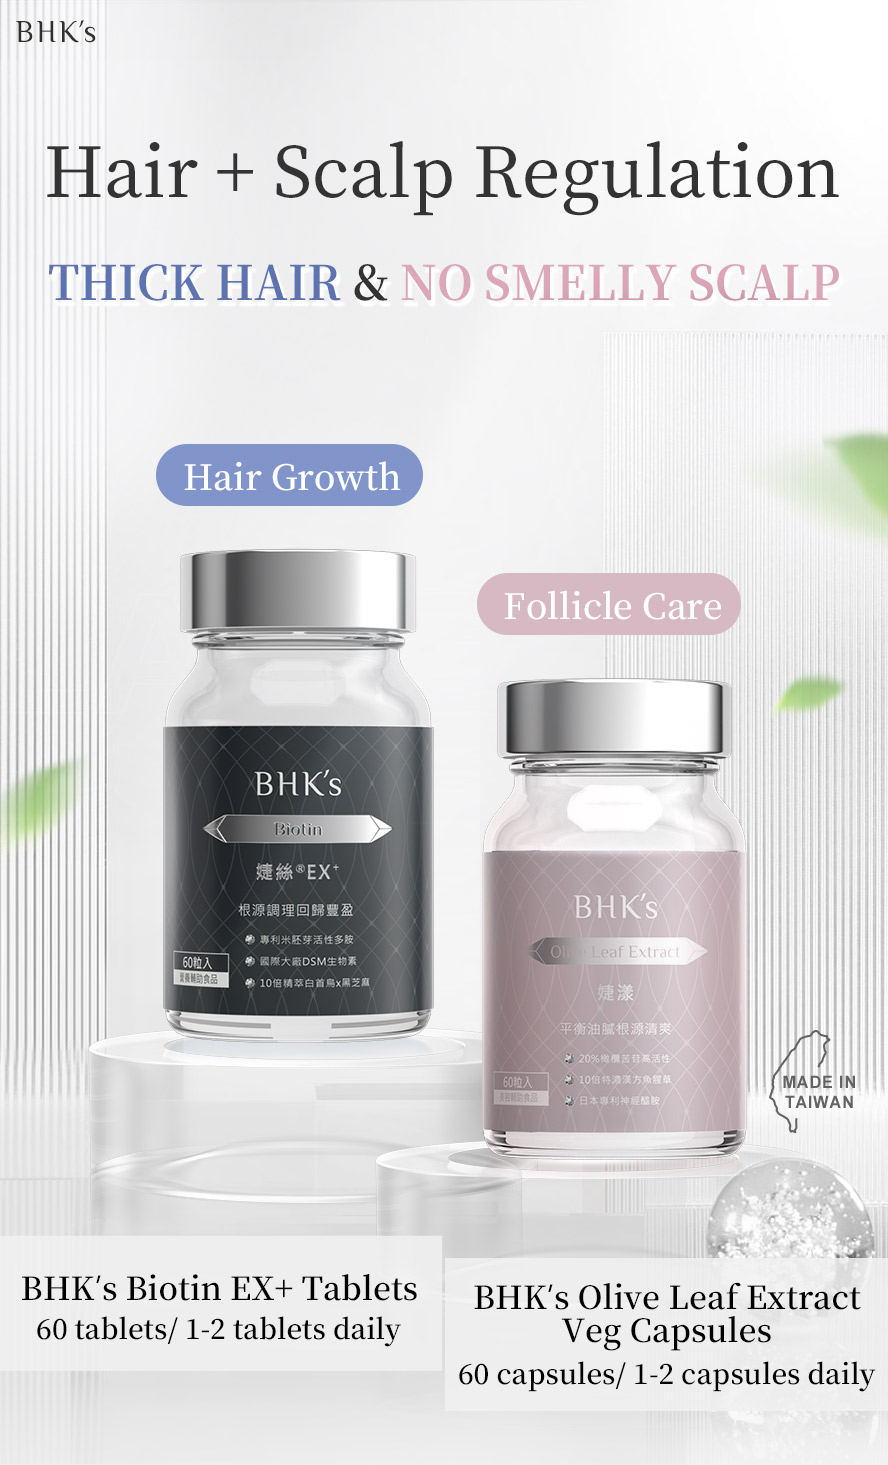 BHK's Biotin EX+ Tablets + Olive Leaf Extract Veg Capsules are set for all-round hair and scalp regulation for hair growth and follicle care